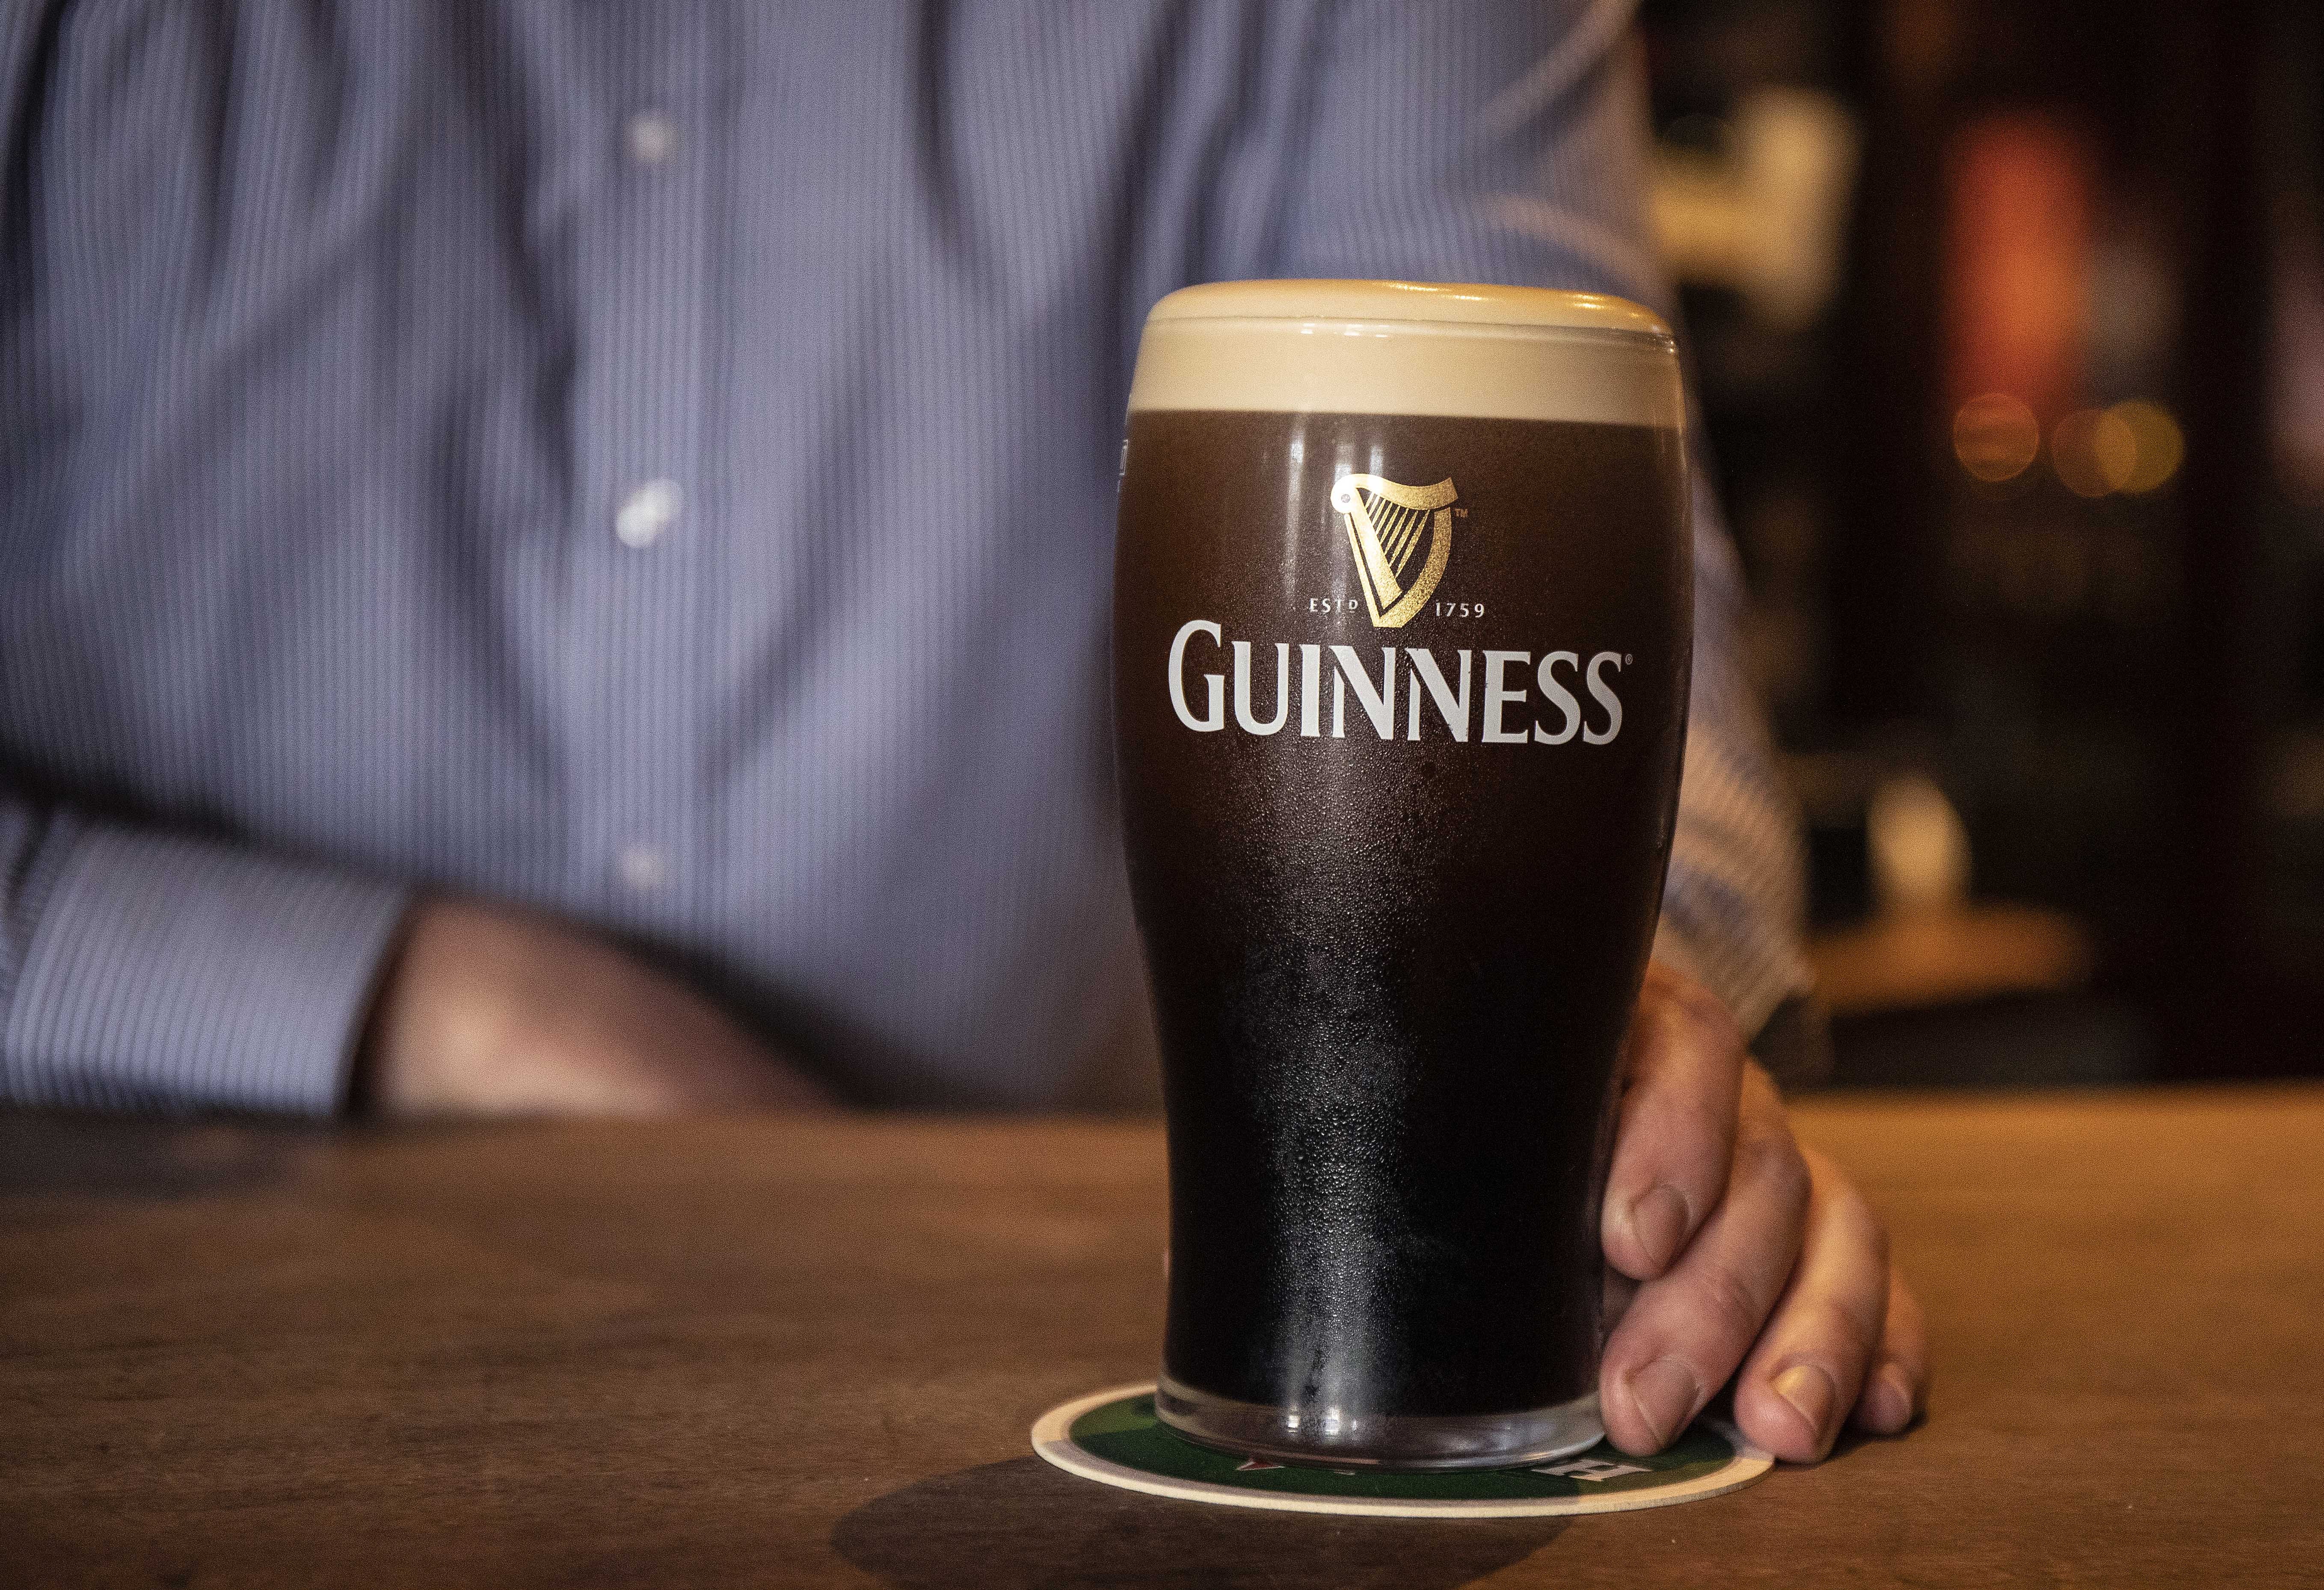 Pubs and restaurants in Ireland will have to close from 8pm on Monday under new Covid regulations (Damien Eagers/PA)